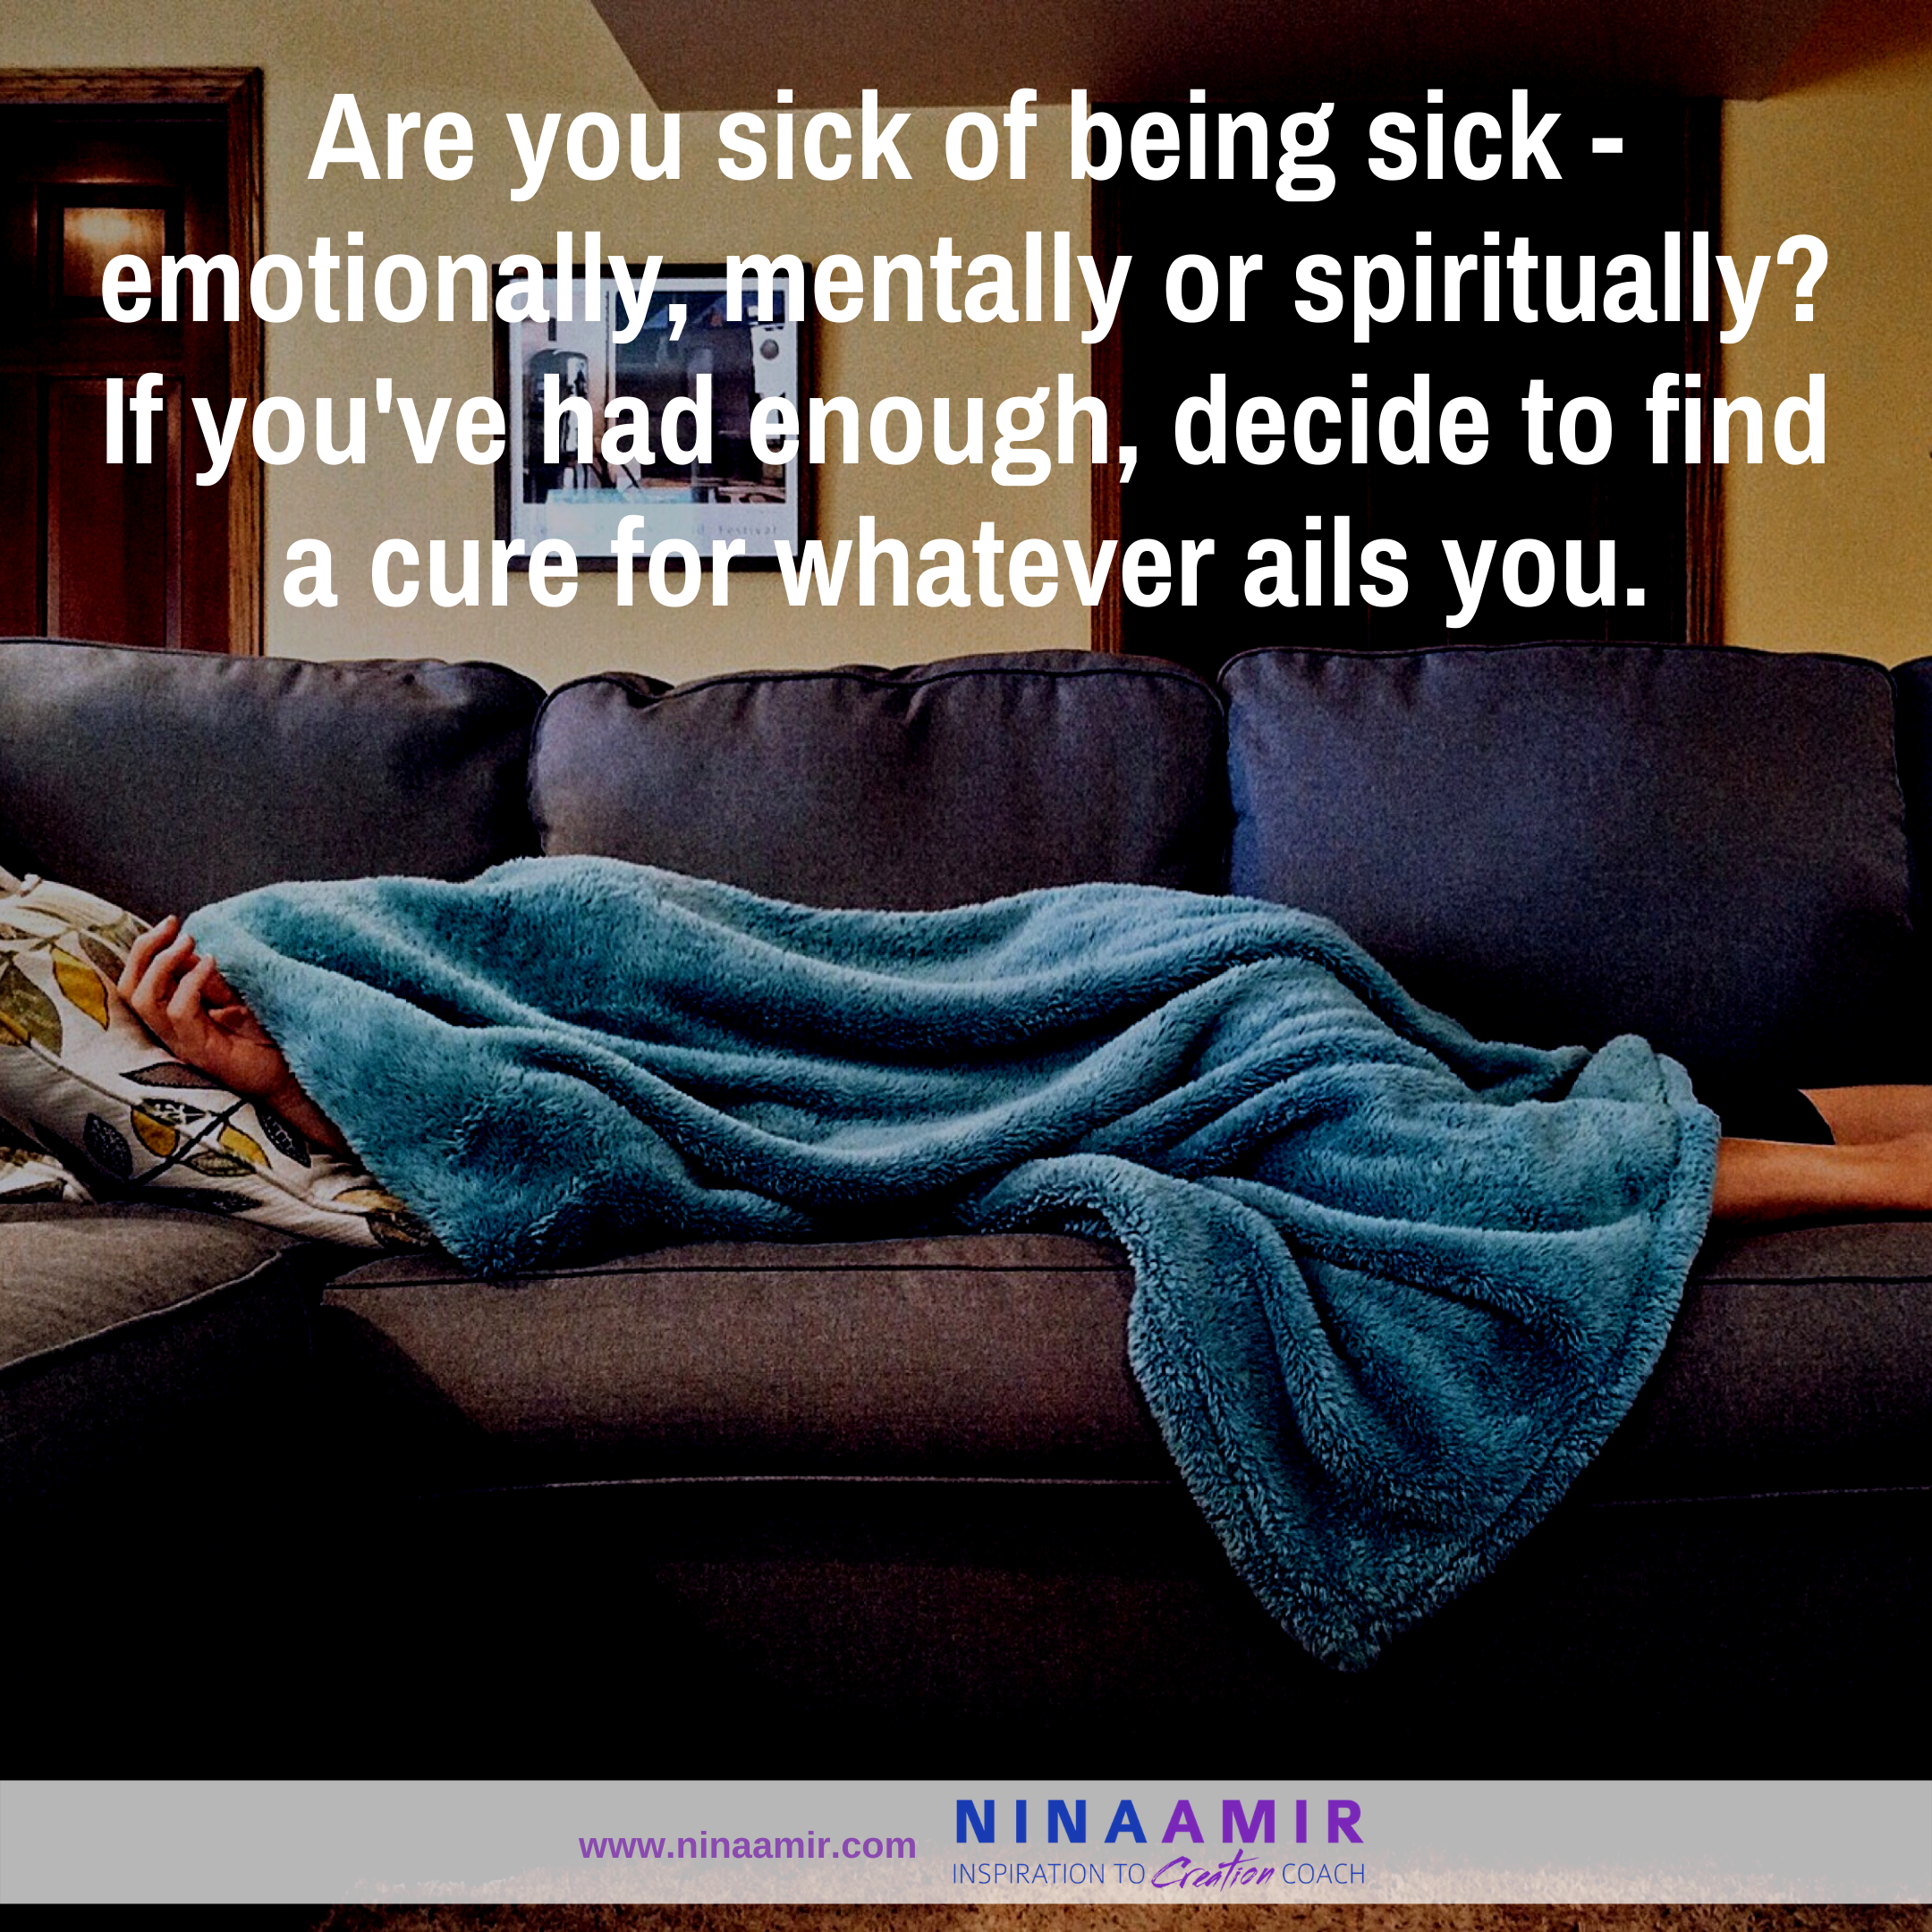 if you ar sick of being sick, find a cure for what ails you.